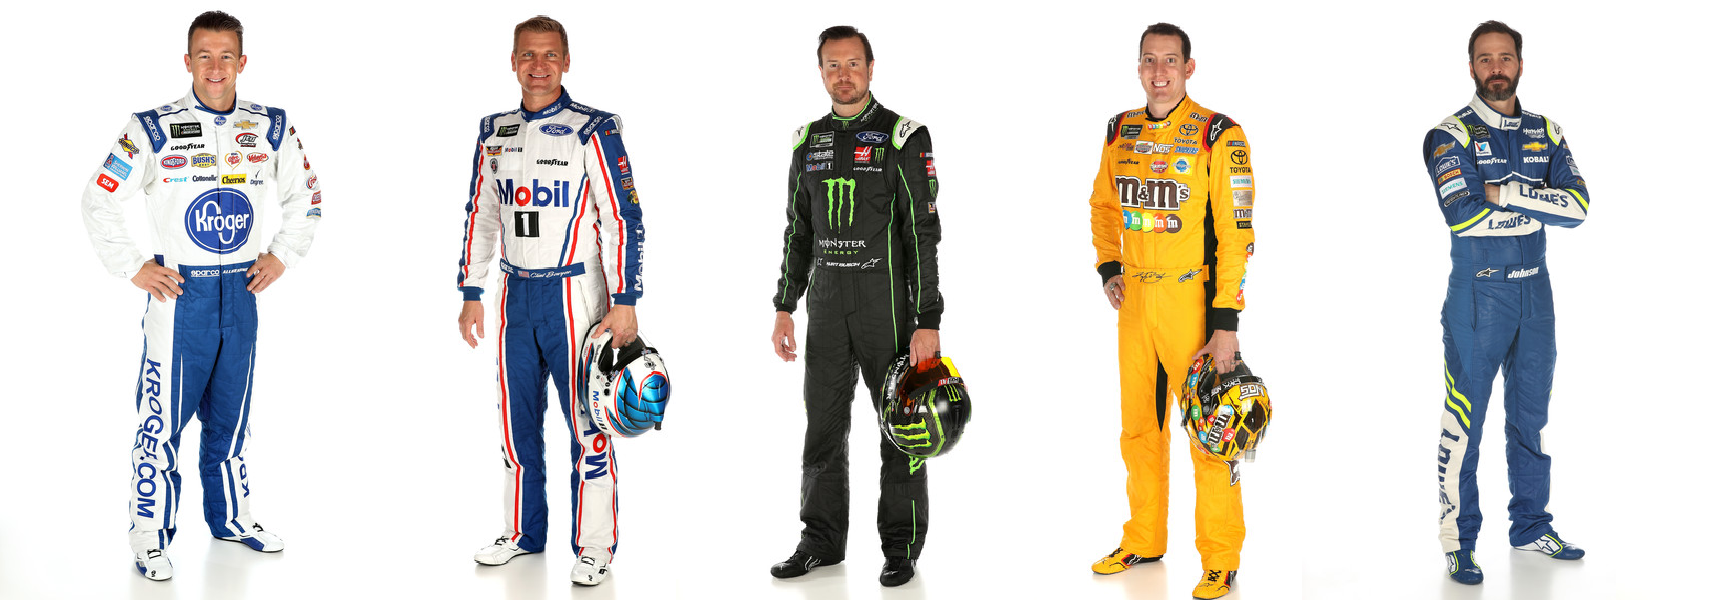 Might one of these fantastic five feel very fine at Sonoma?